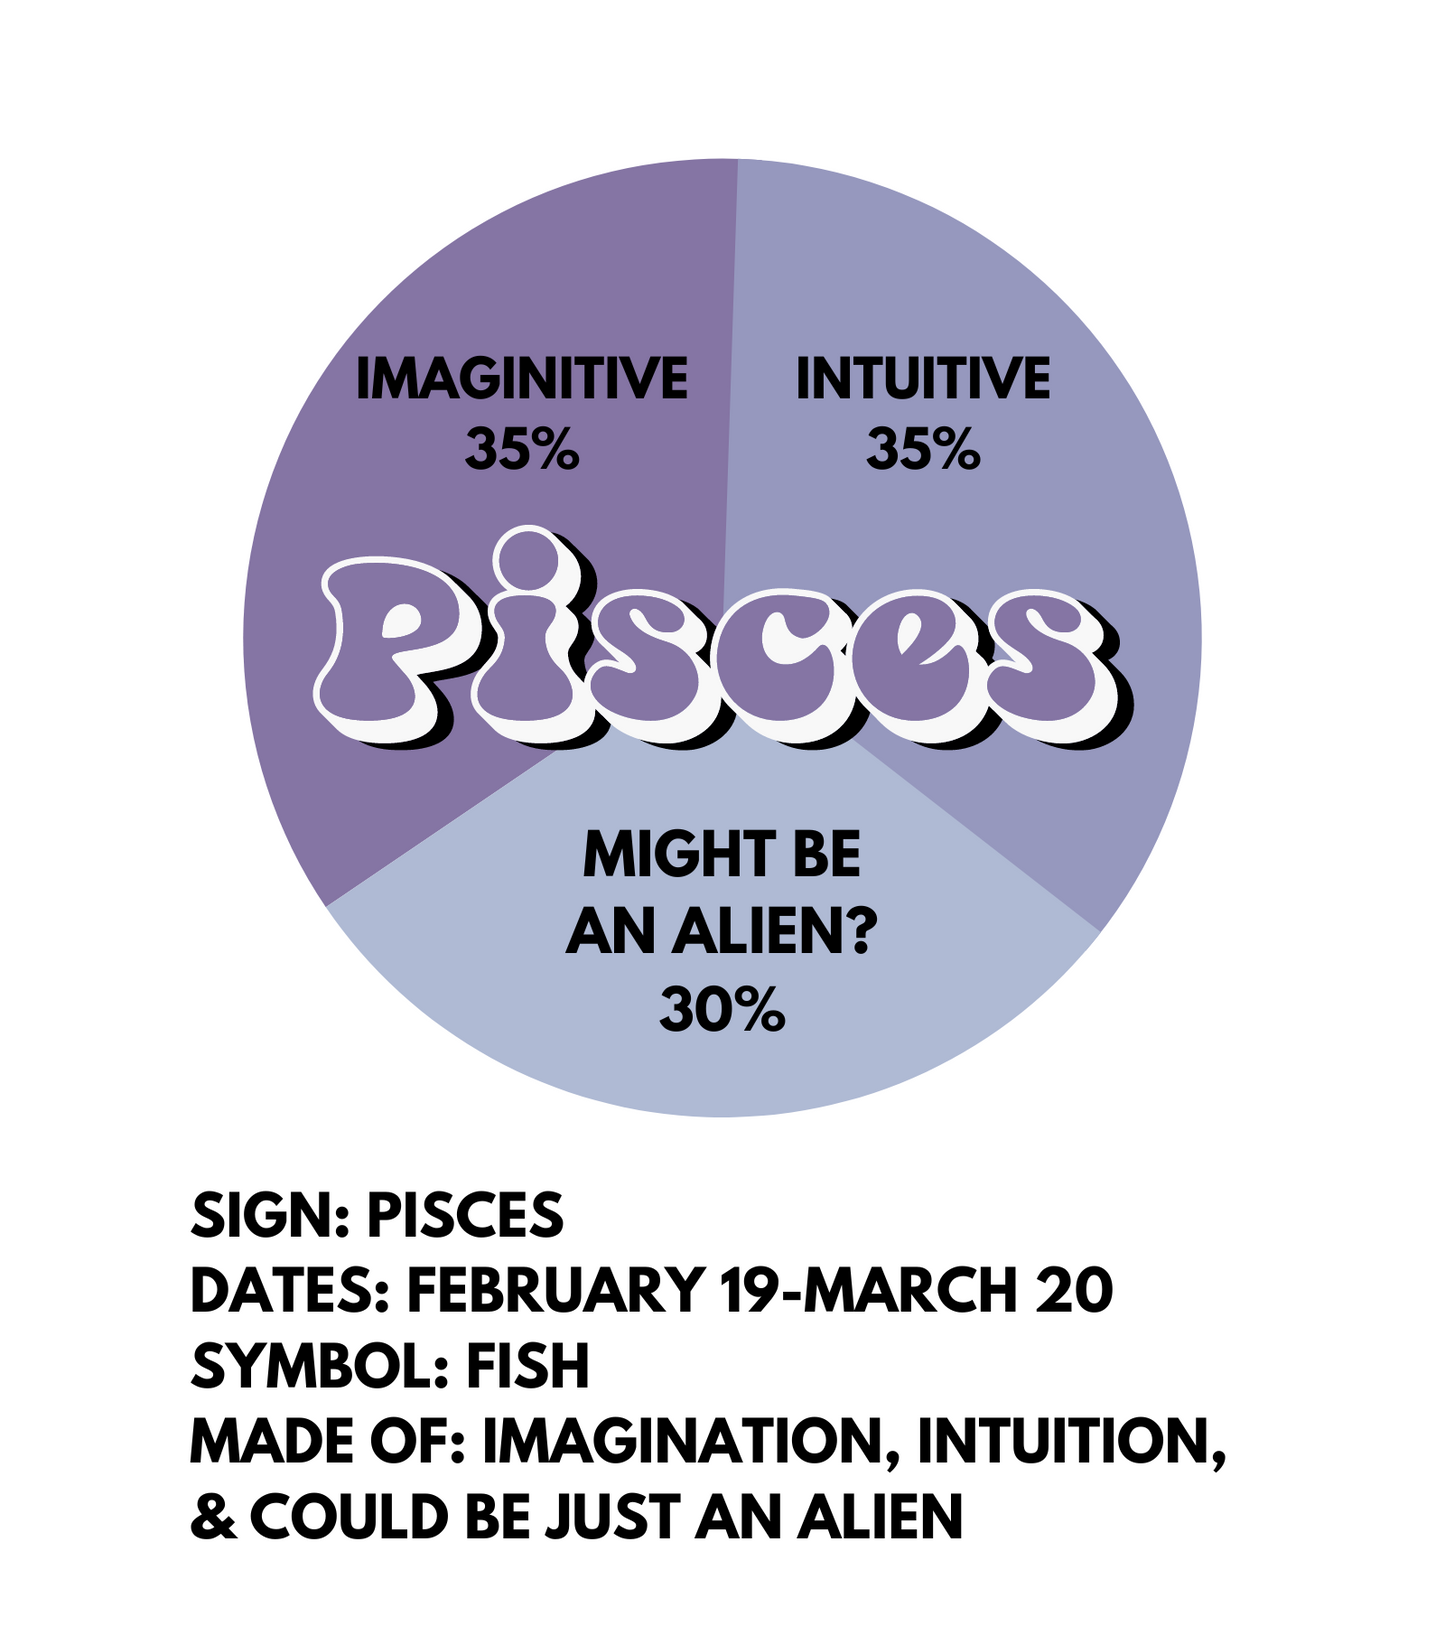 A circular sticker design of a pie chart, with the word Pisces in the middle. The pie chart is broken up into 3 sections: 35% imaginitive, 35% intuitive, 30% might be an alien. Underneath the design there is the text: SIGN: PISCES DATES: FEBRUARY 19-MARCH 20 SYMBOL: FISH MADE OF: IMAGINATION, INTUITION, & COULD BE JUST AN ALIEN